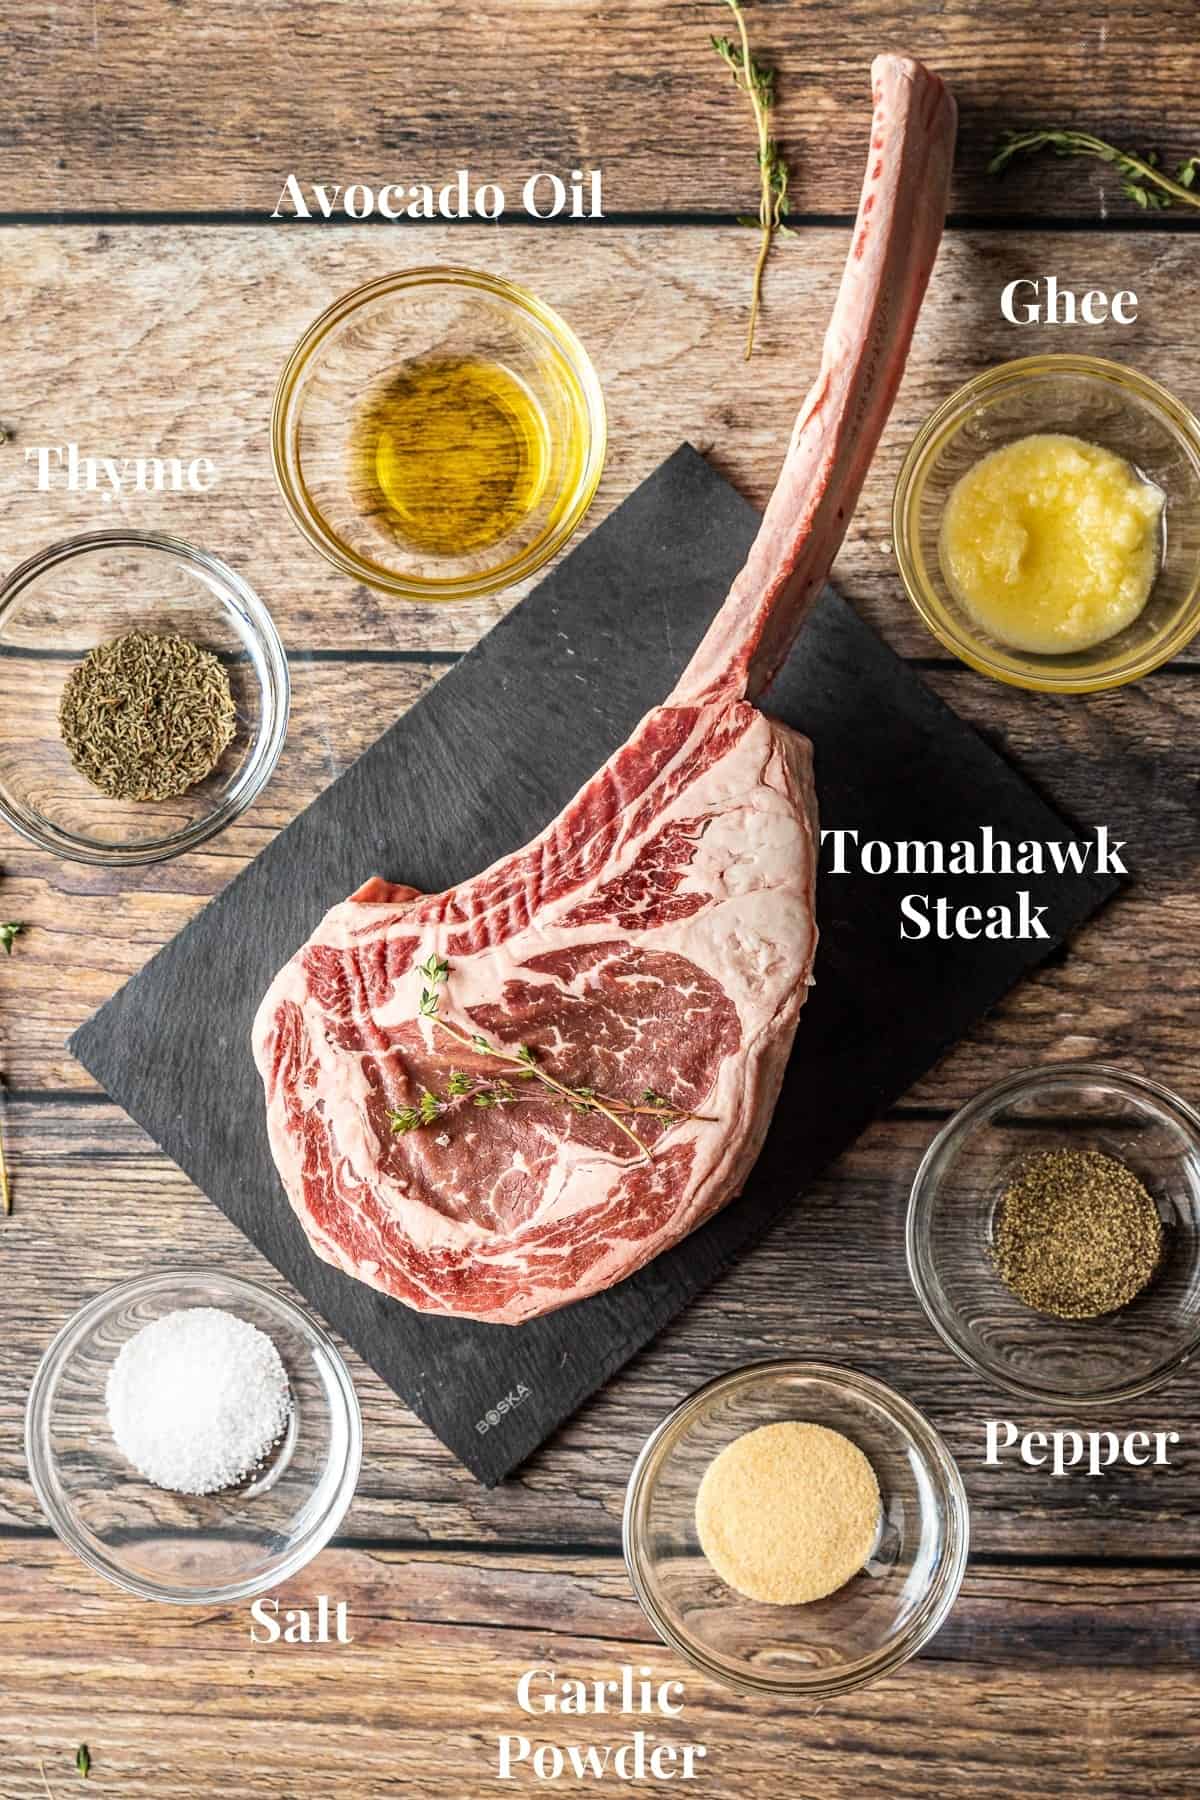 An overview shot of the ingredients needed to smoke a tomahawk steak on a wood background.